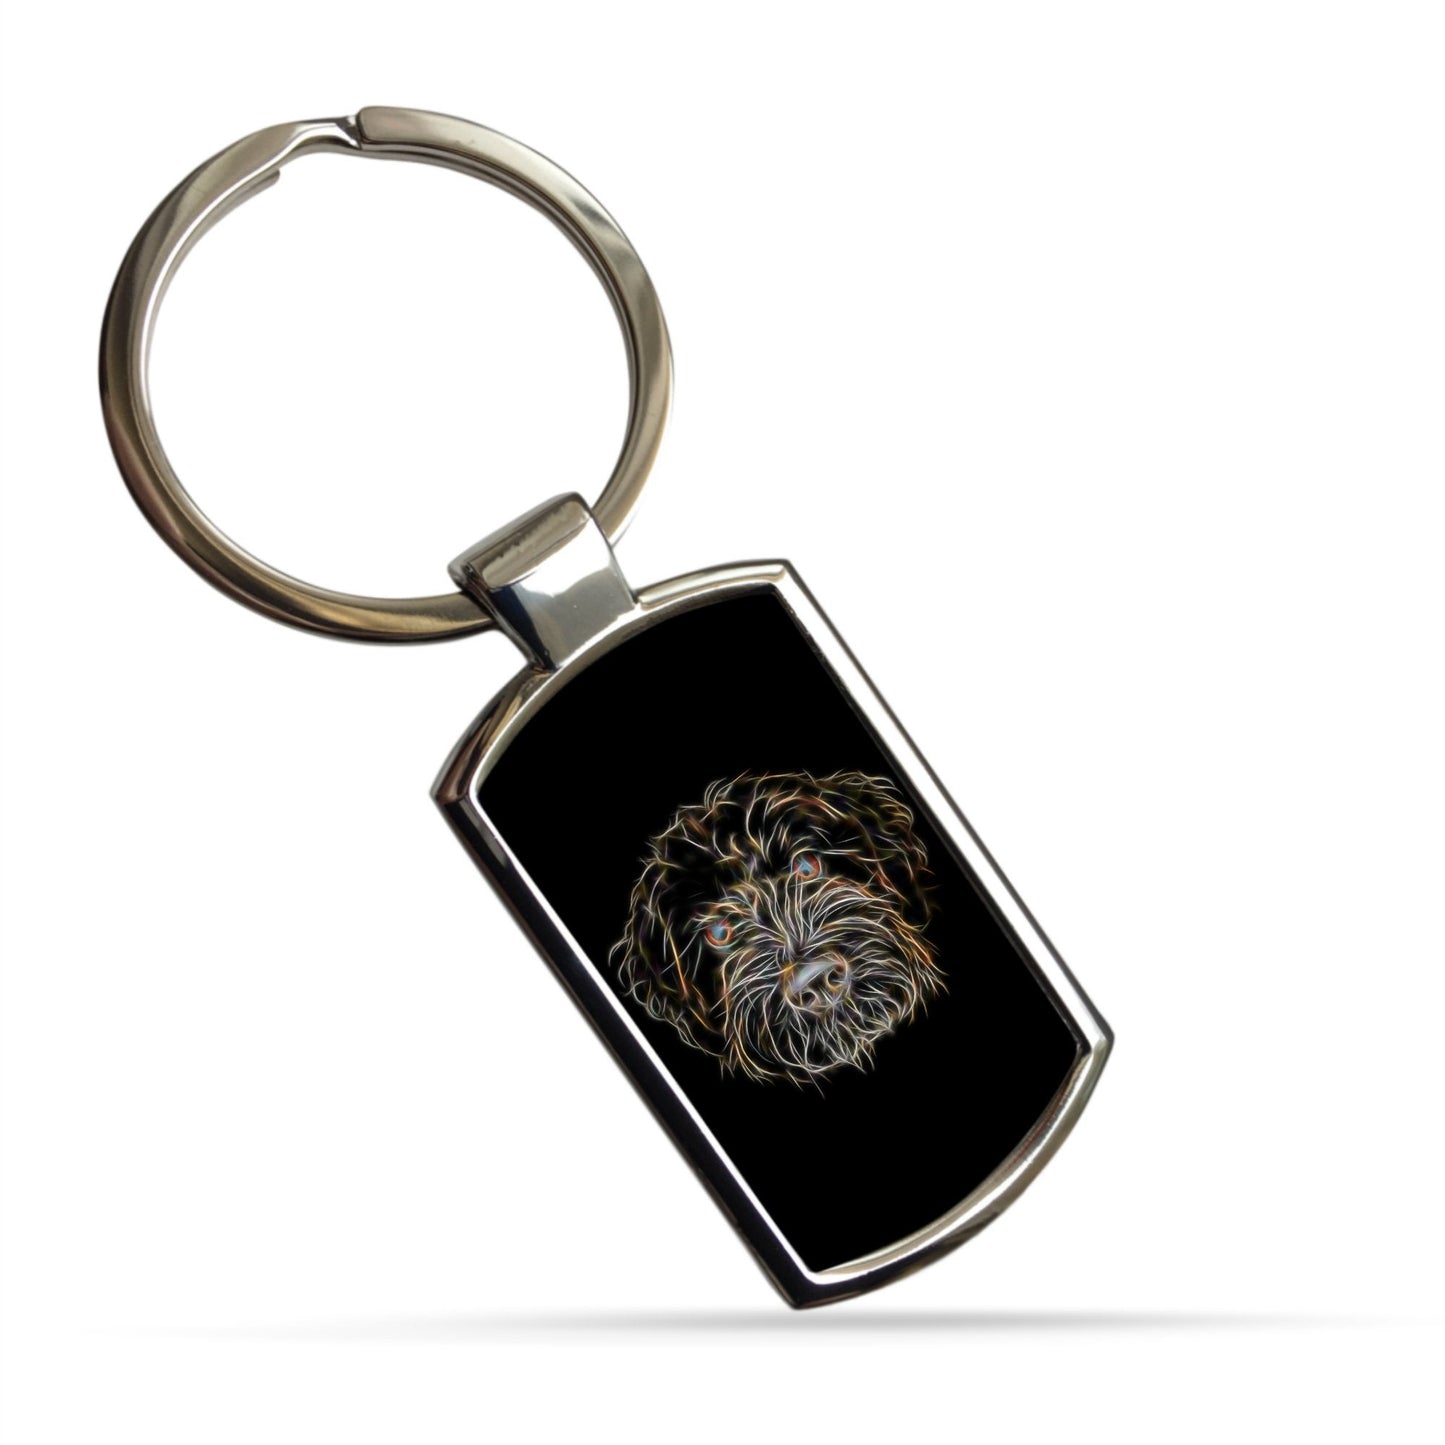 Labradoodle Keychain, Keyring, or Bagtag with Stunning Fractal Art Design. A Perfect Gift for Doodle Dog Lover.